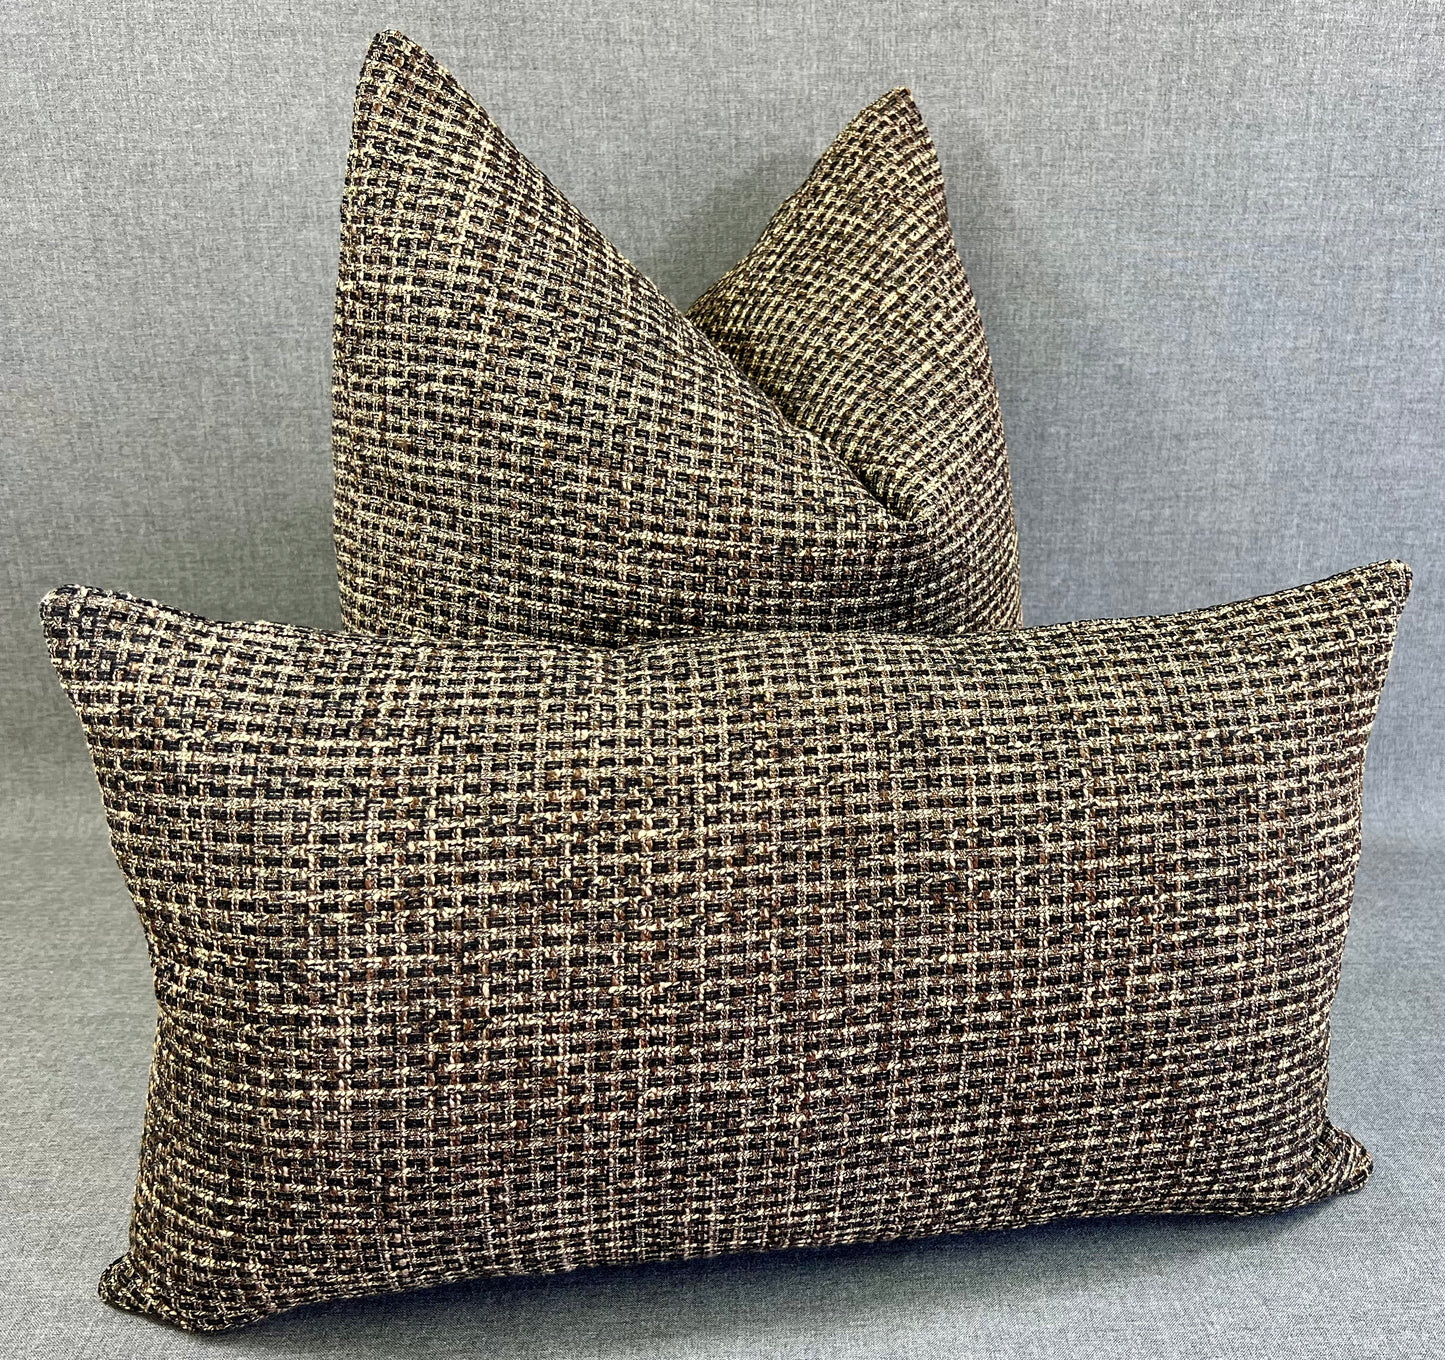 Luxury Lumbar Pillow - 24" x 14" - Uptown Evening; Blacks, Browns and Gold on a Textured Tweed Fabric